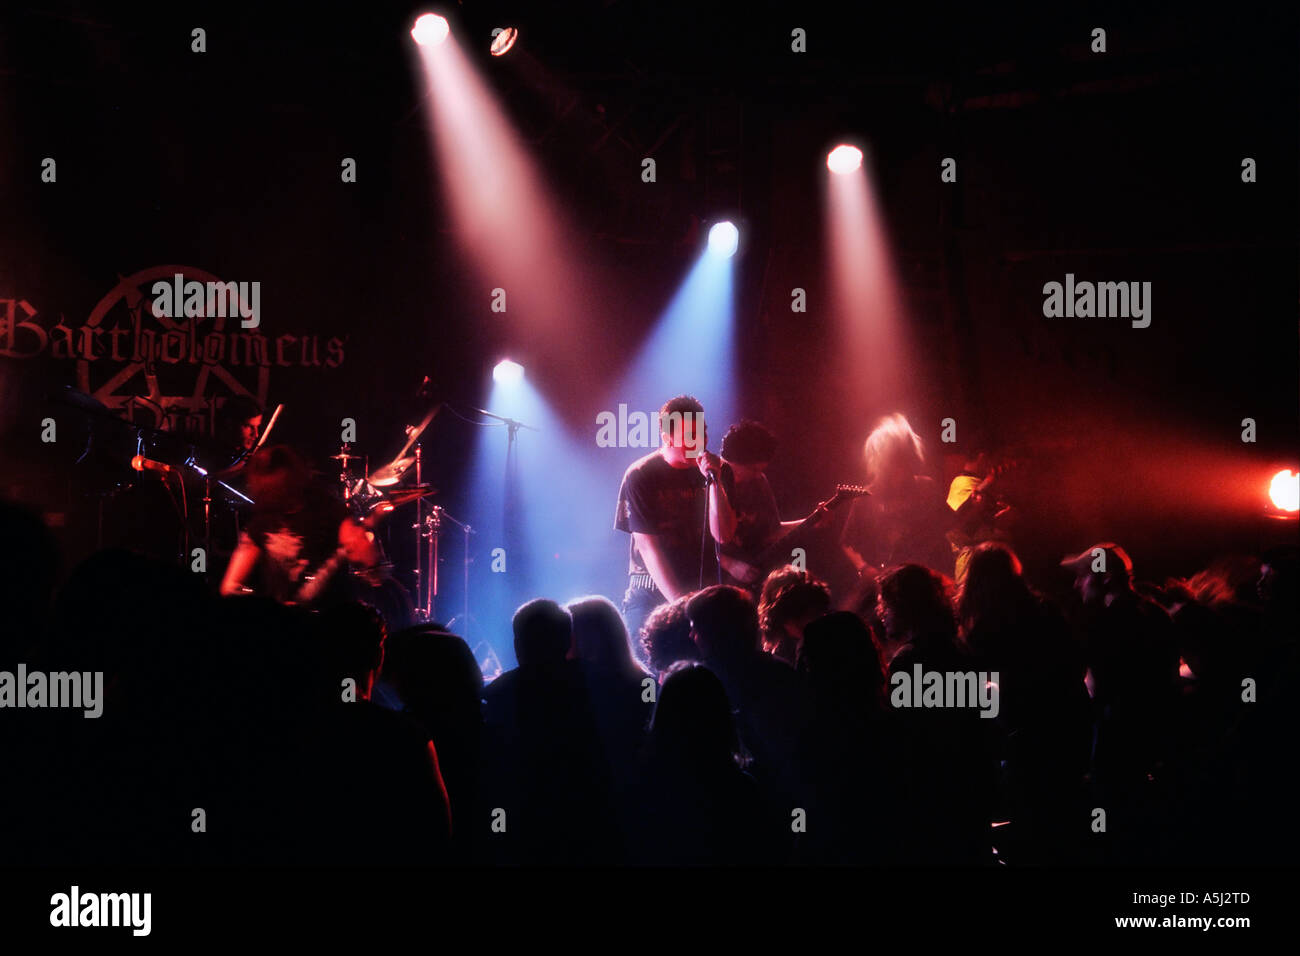 band during a Heavy Metal rock performance Stock Photo - Alamy